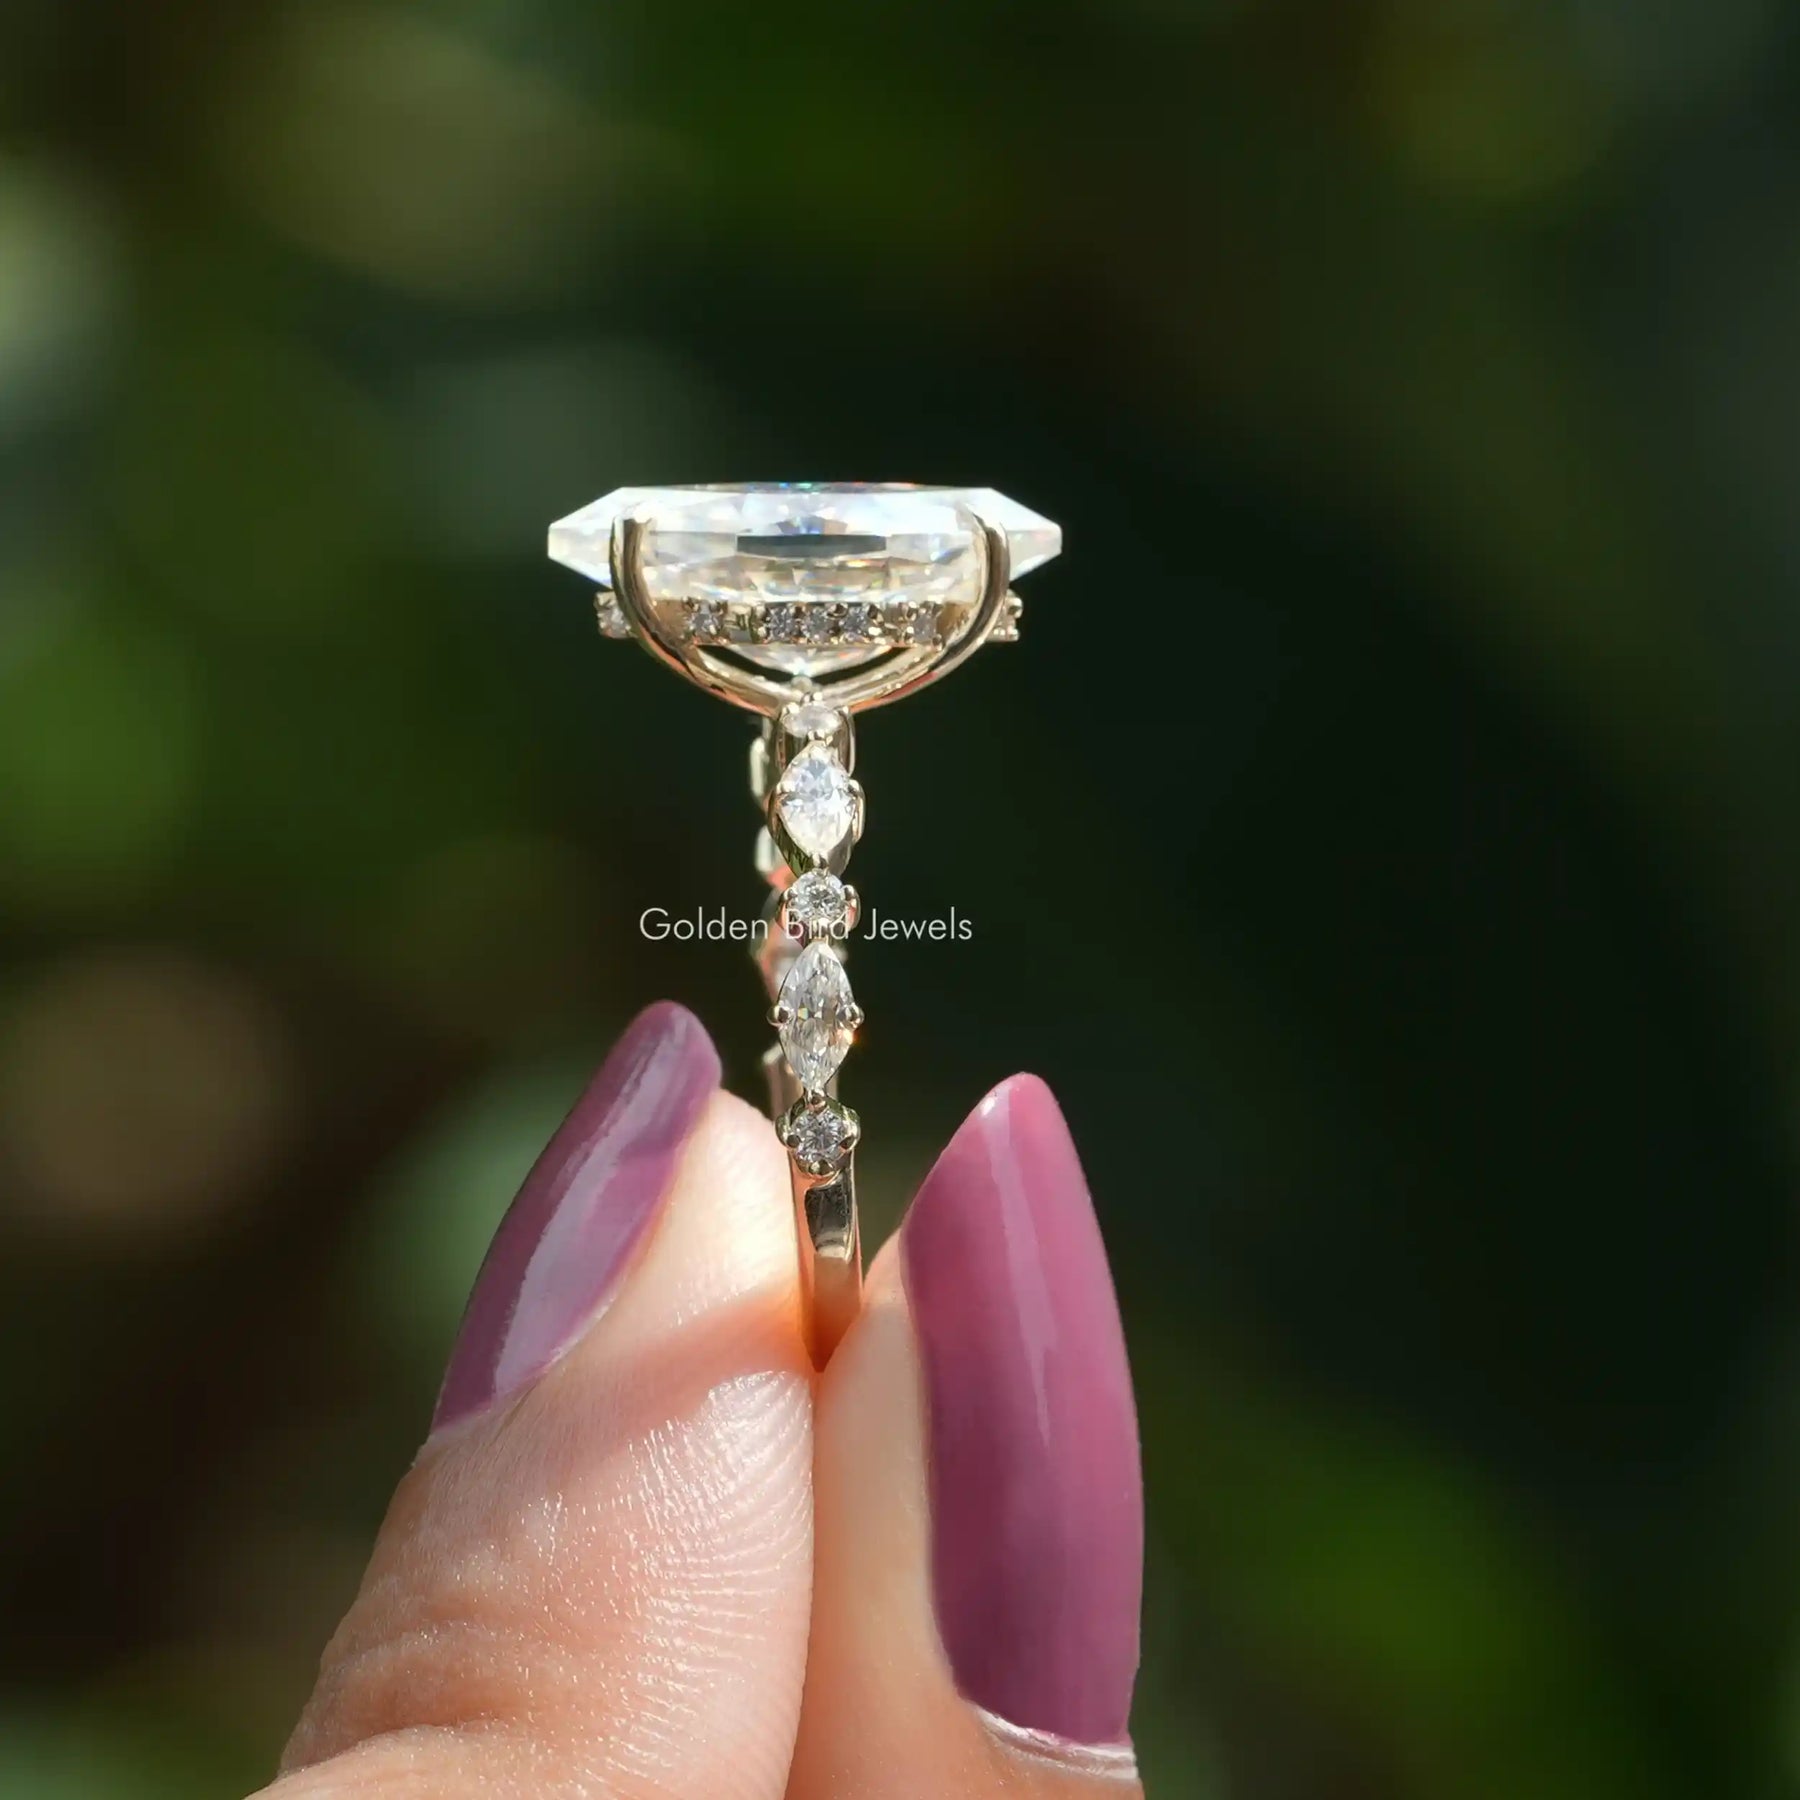 [Side view of marquise cut hidden halo engagement ring]-[Golden Bird Jewels]